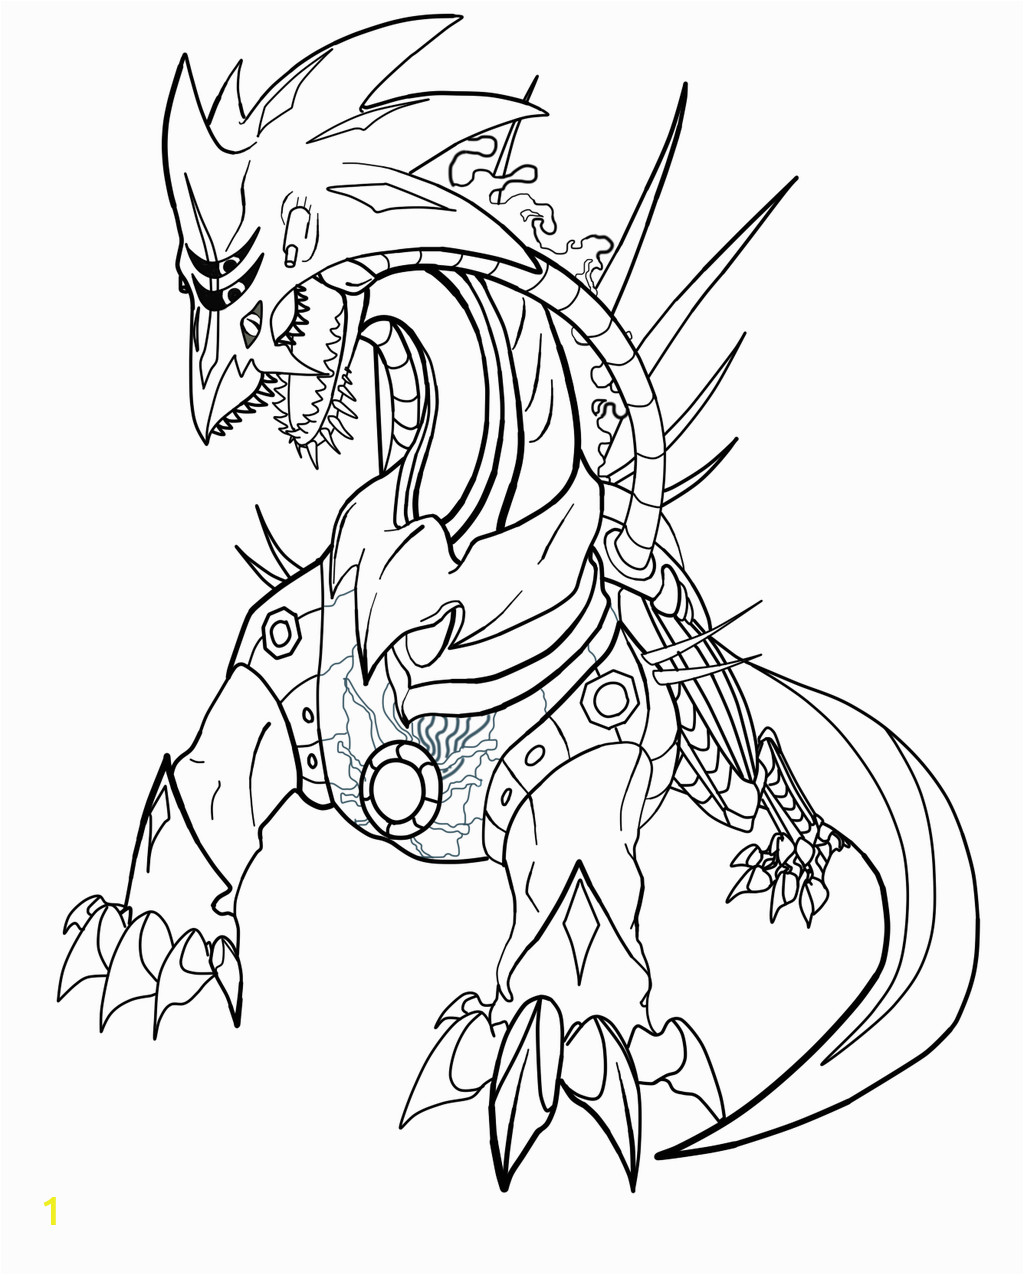 Metal sonic Coloring Pages to Print Super sonic Coloring Page Coloring Home